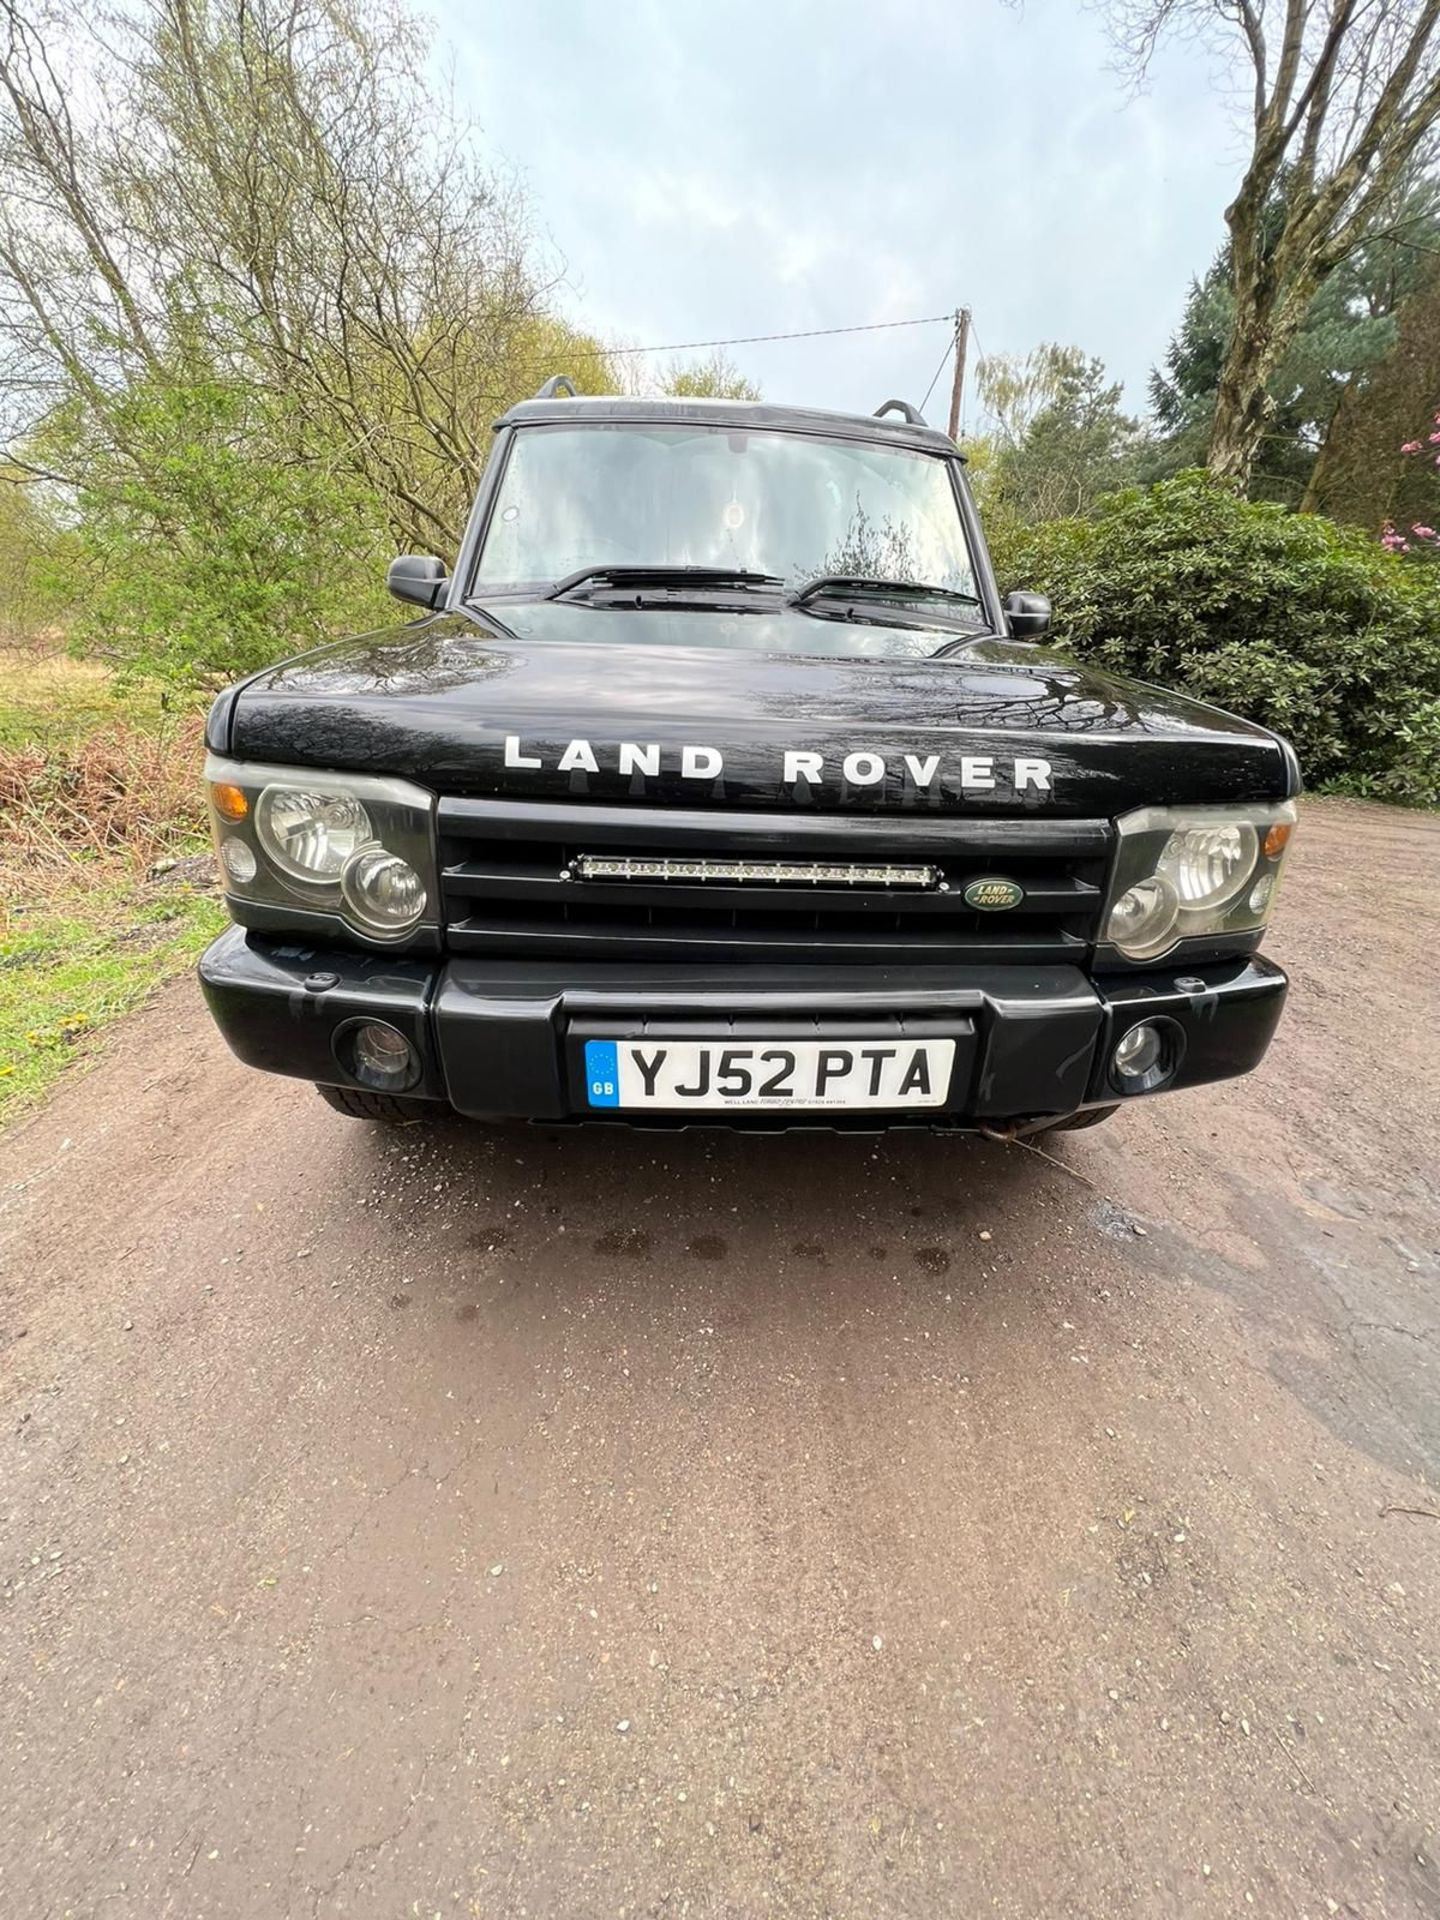 2002 52 PLATE LAND ROVER DISCOVERY 2 SUV ESTATE - TD5 - TOP OF THE RANGE - HALF LEATHER SEATS - Image 2 of 15